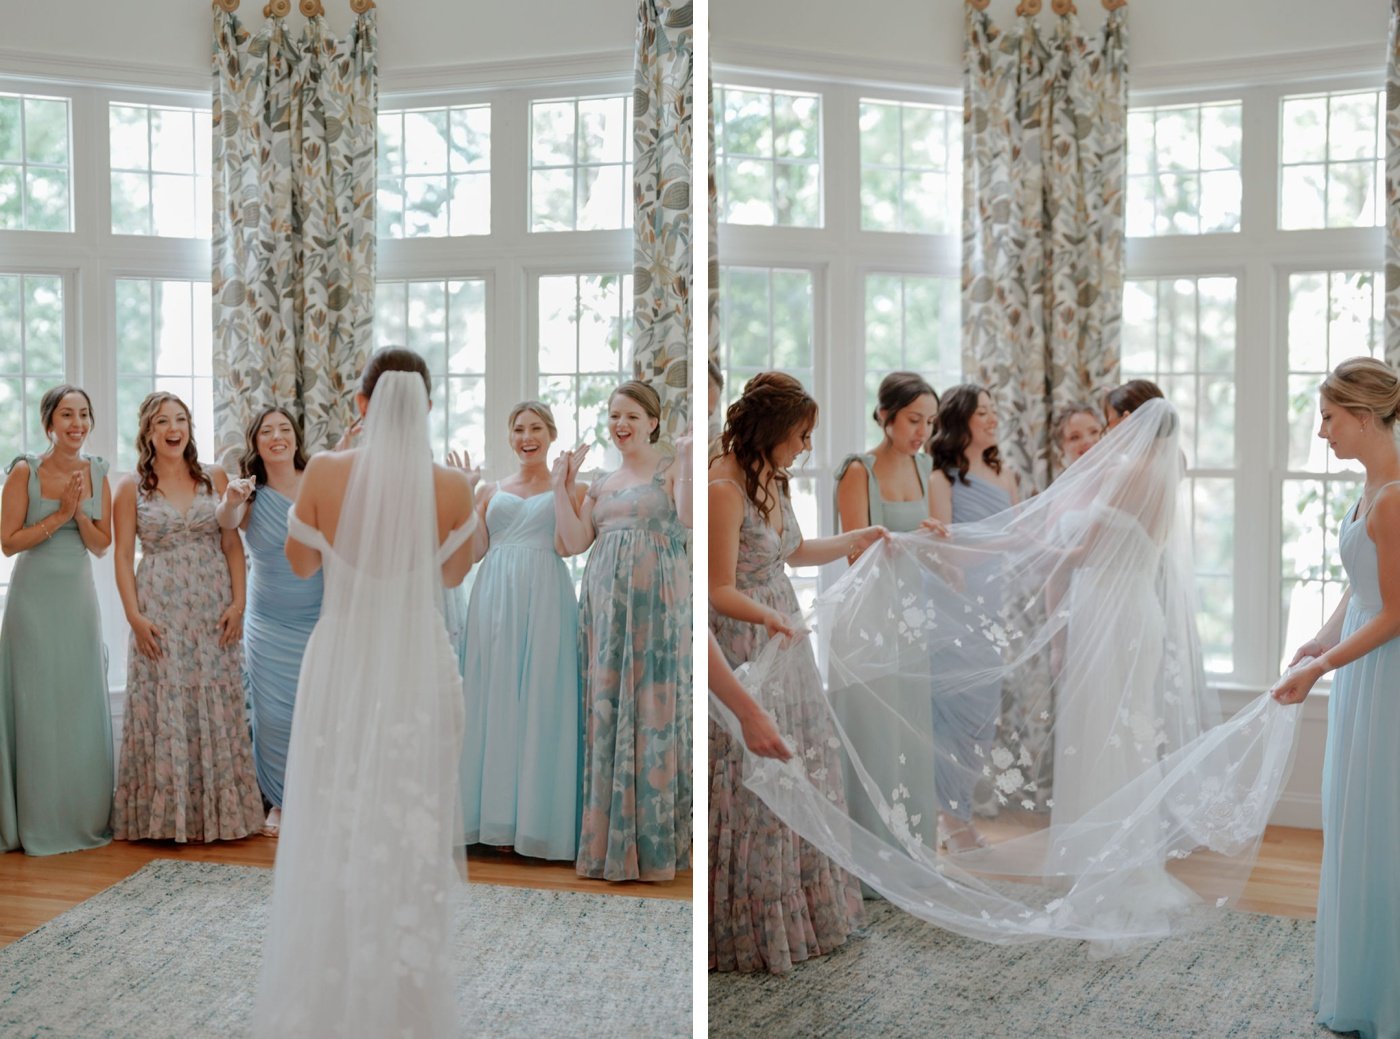 First look with bridesmaids at a New England wedding